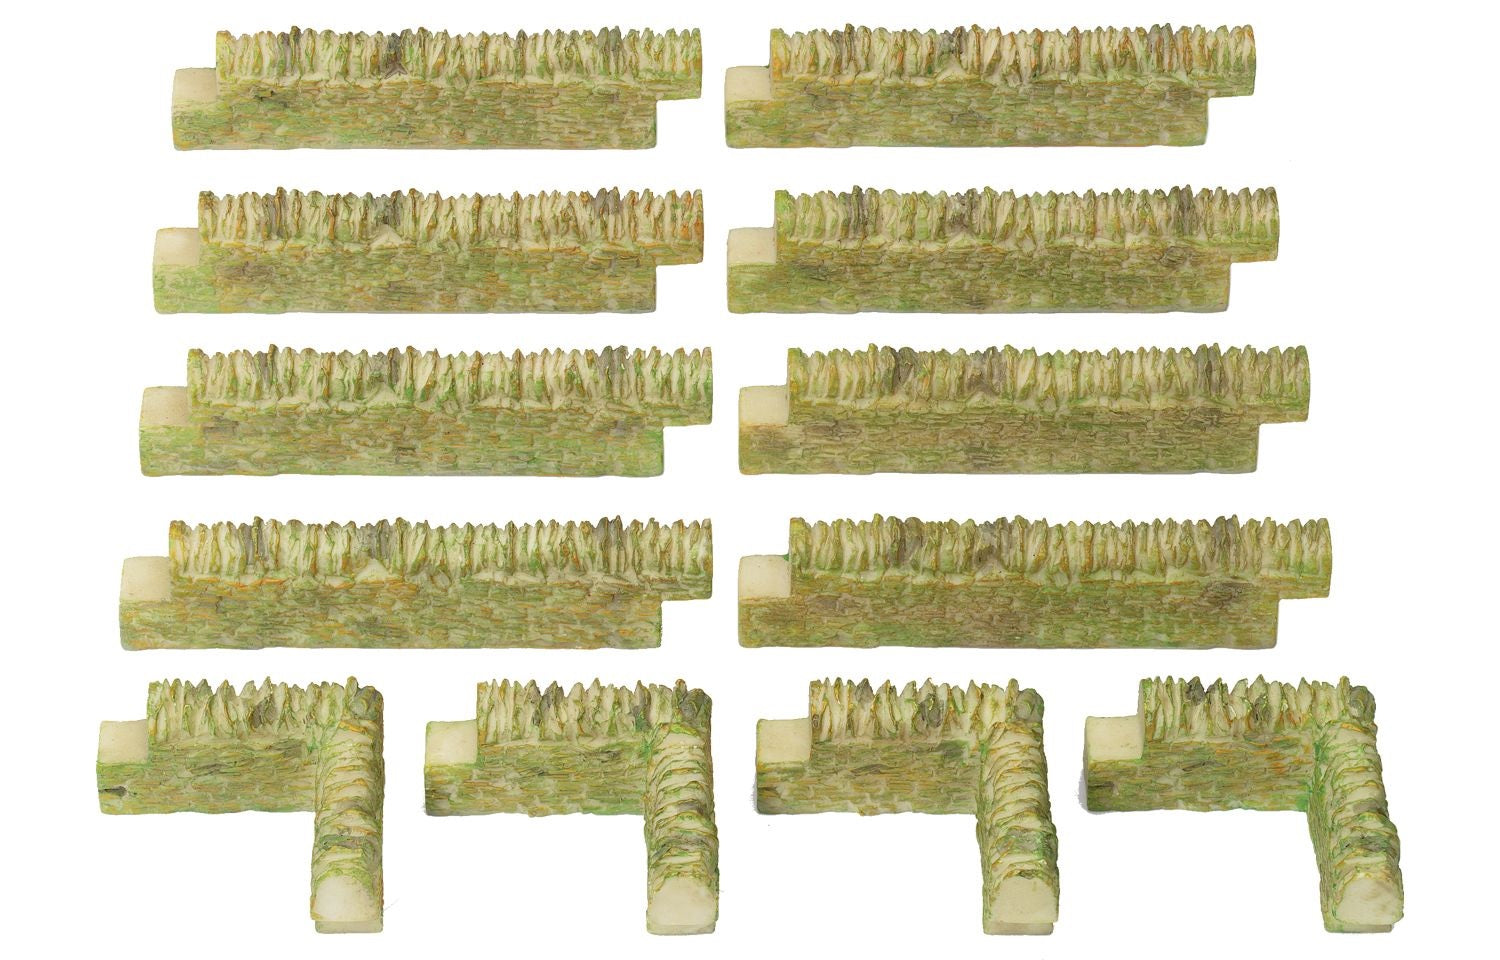 Hornby - Granite Wall Pack No. 1